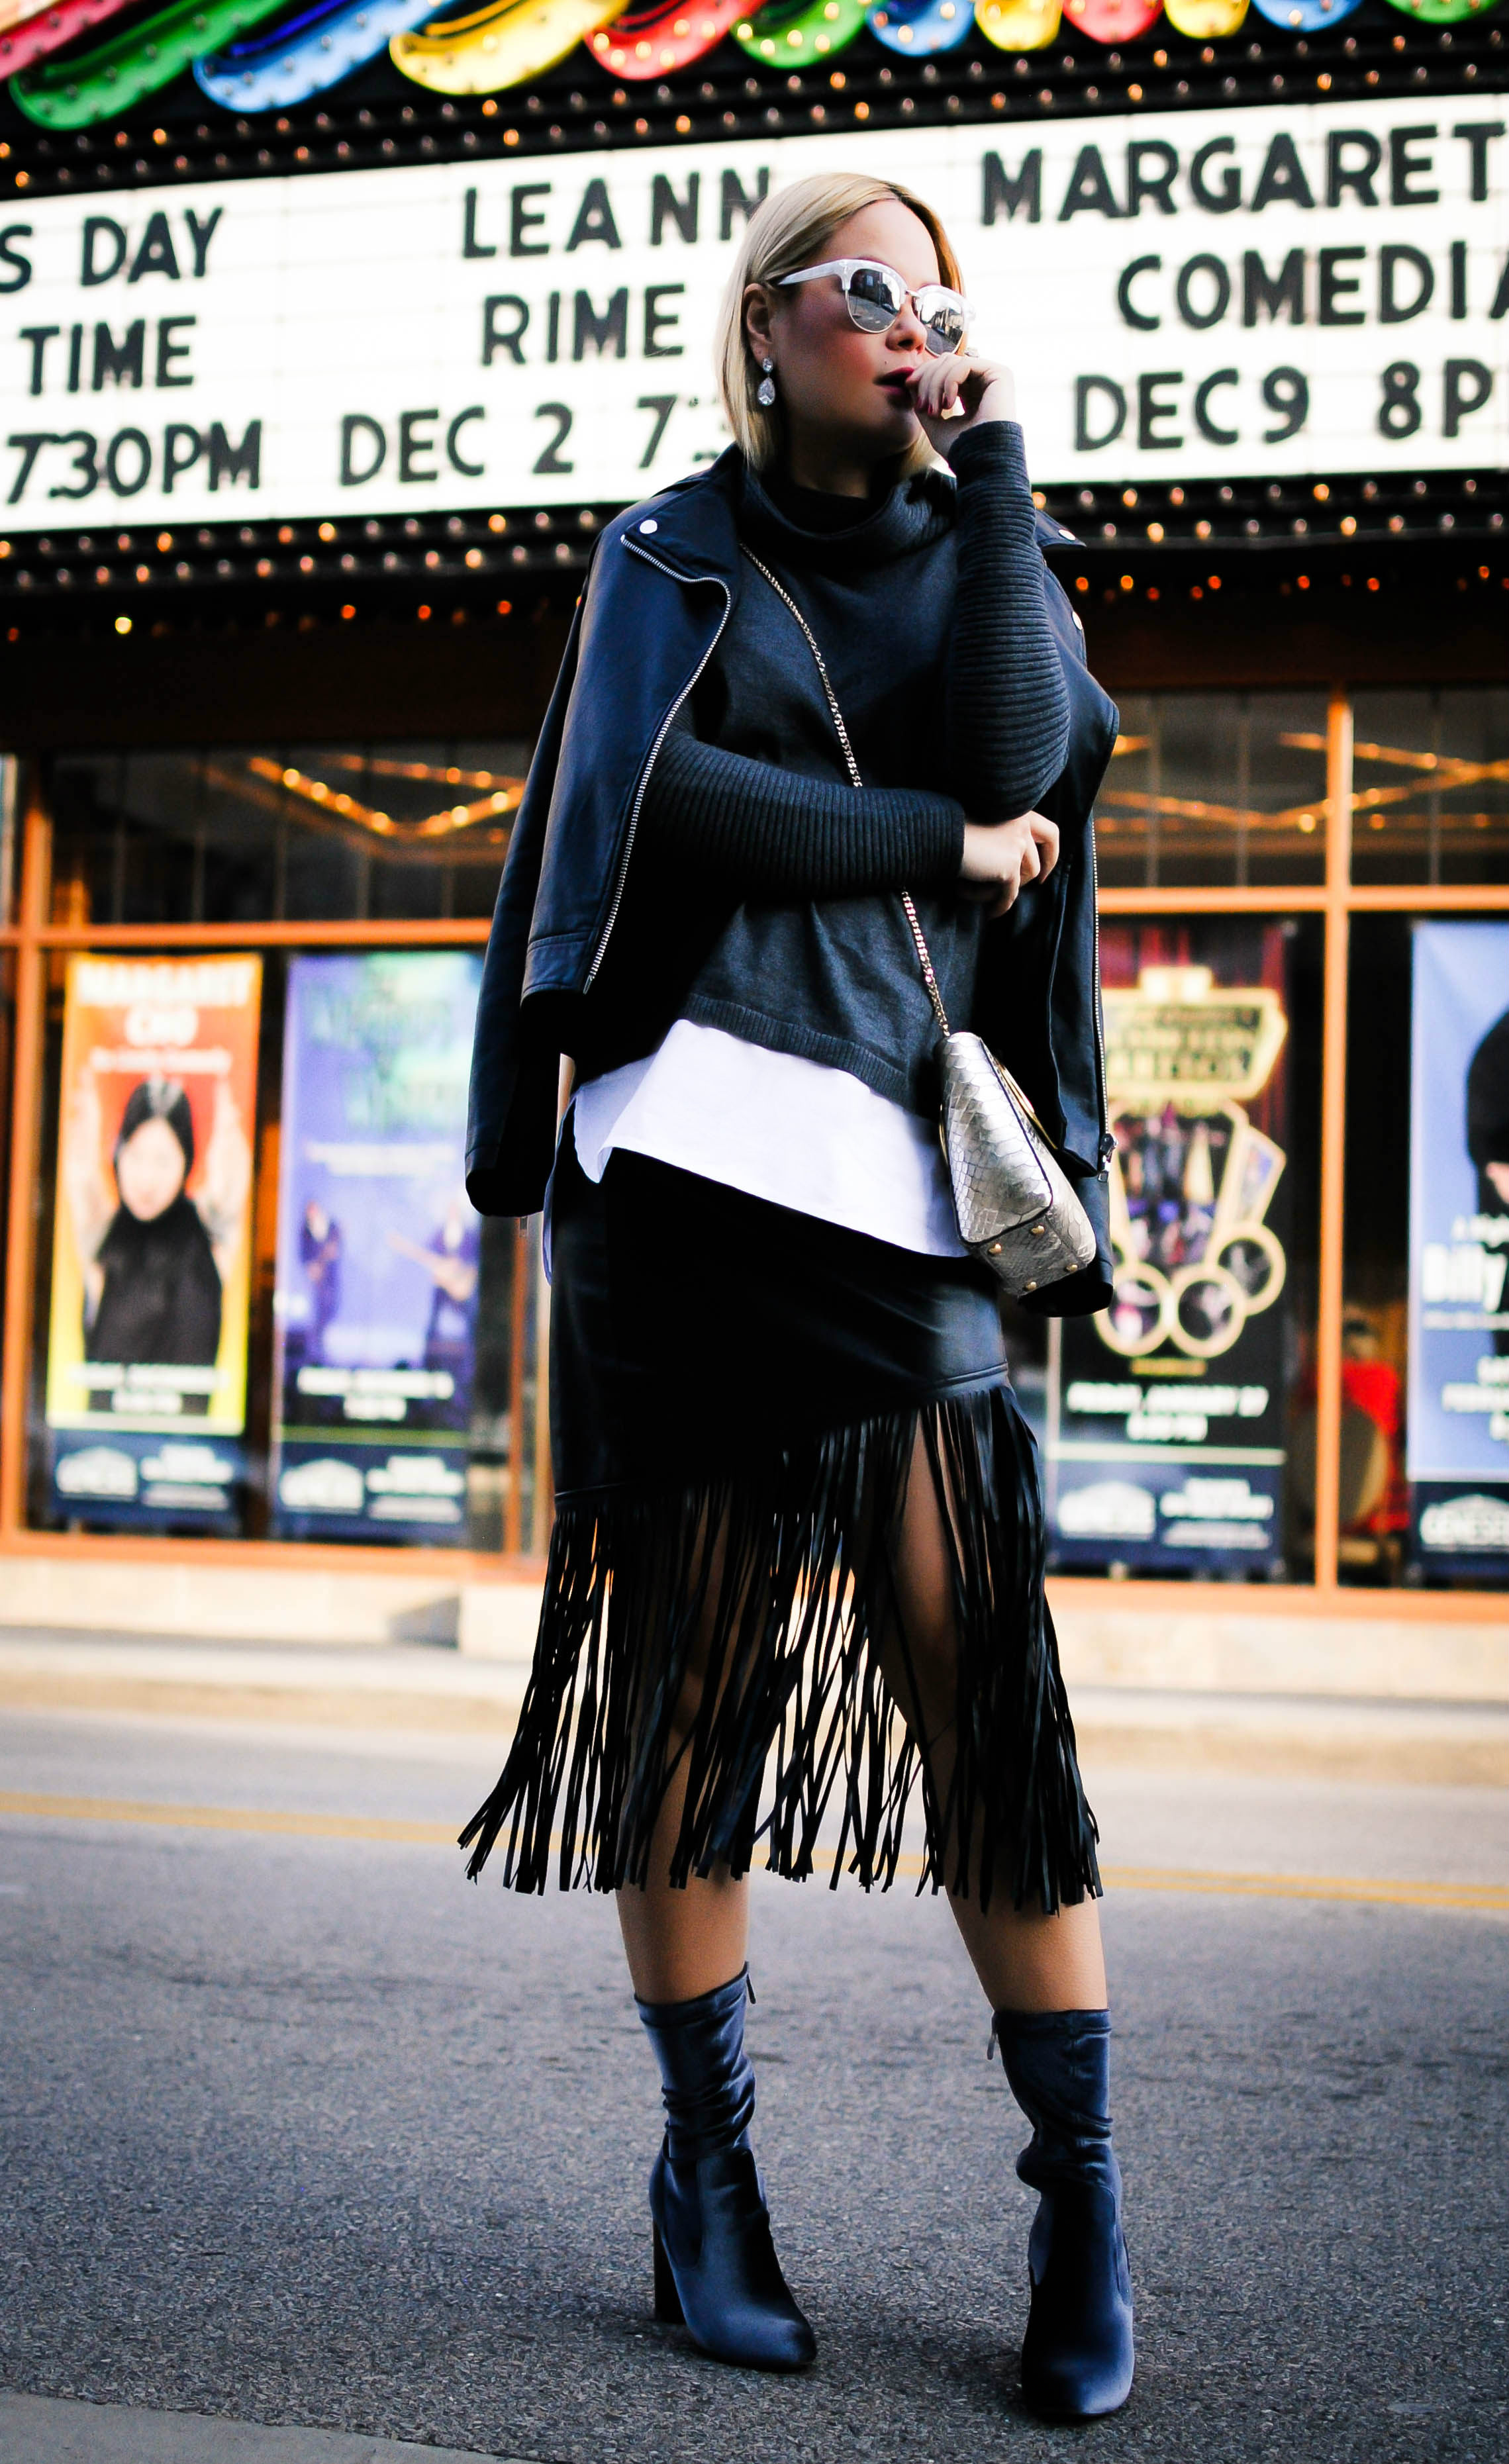 vanessa-lambert-blogger-behind-what-would-v-wear-shows-how-to-wear-fringe-during-winter-wearing-a-leather-fringe-skirt-and-velvet-booties_1